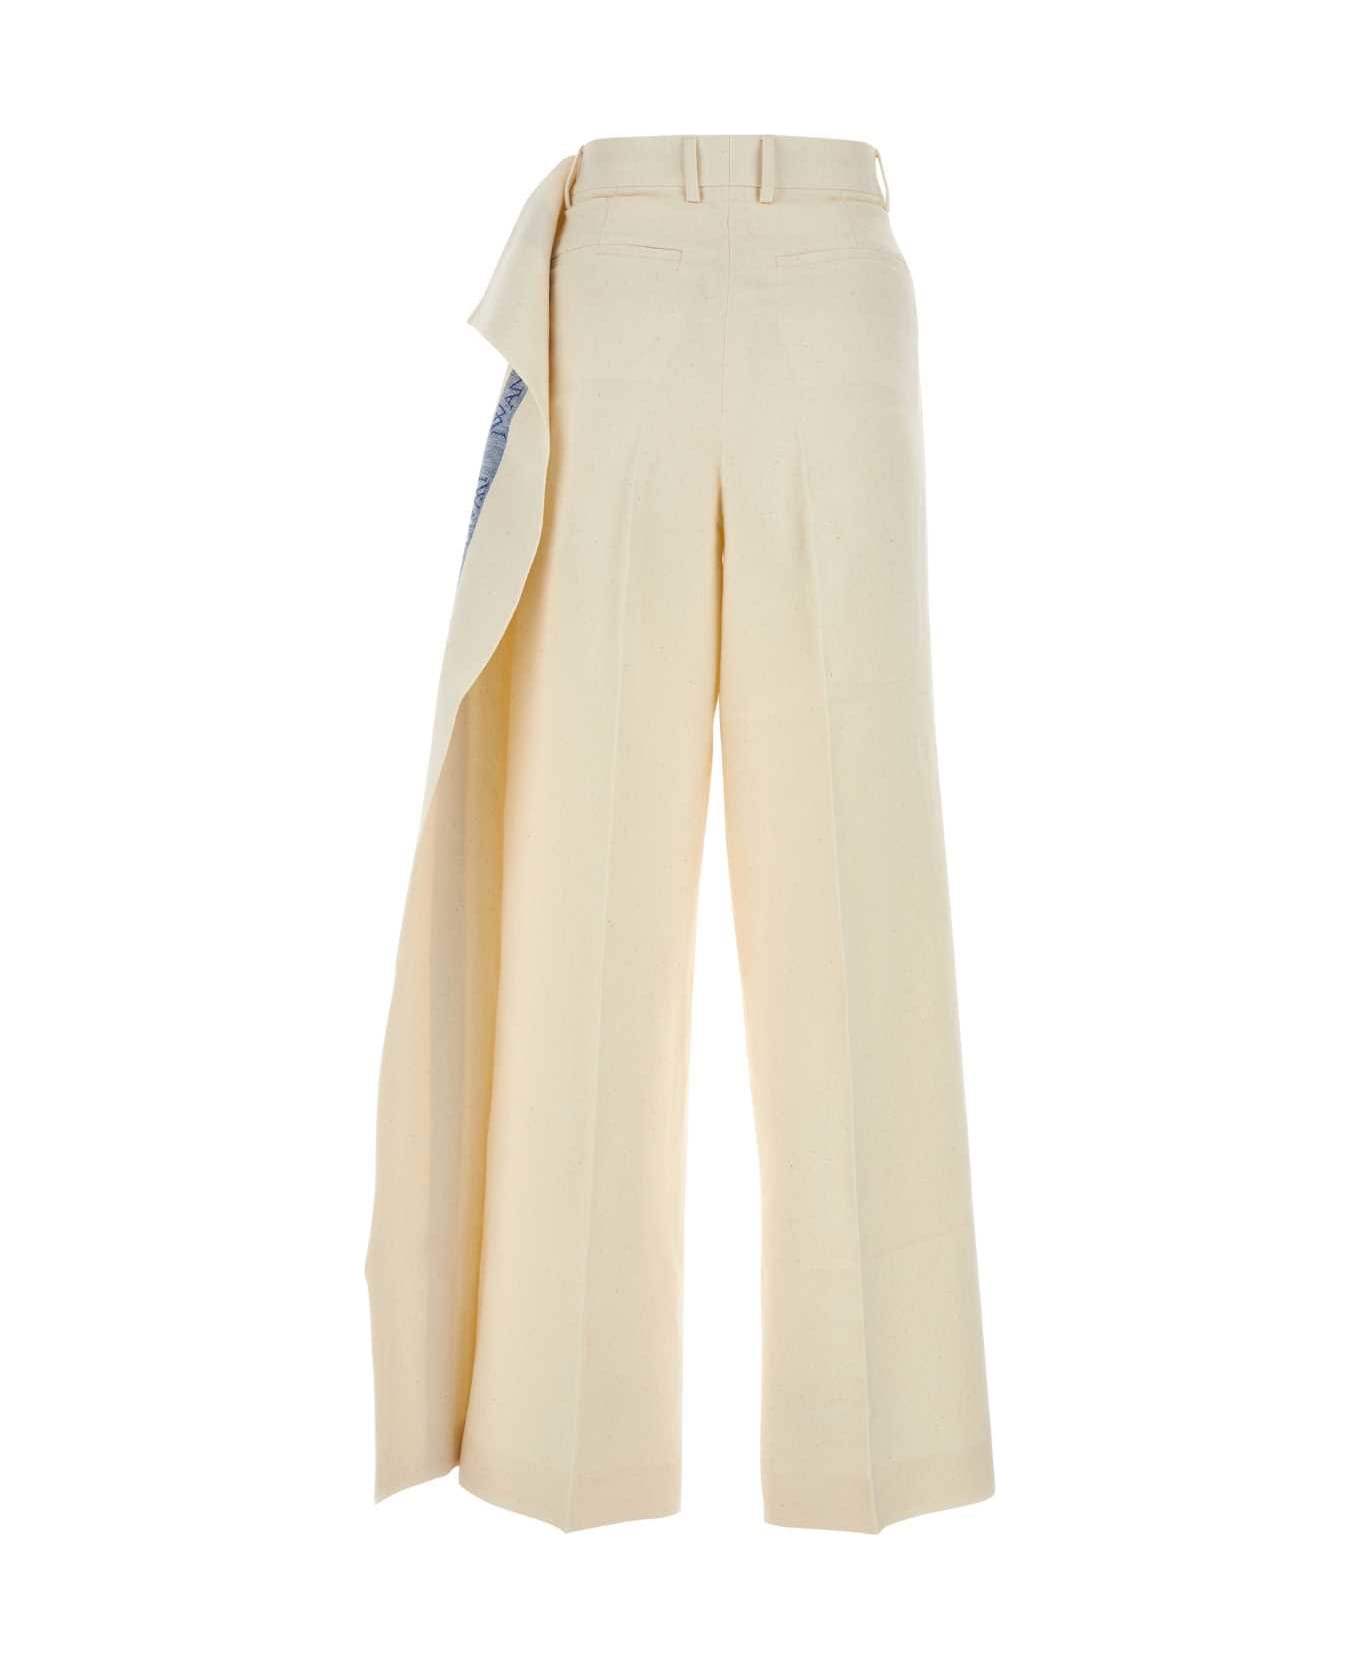 J.W. Anderson Ivory Cotton Blend Wide-leg Pant - CREAM ボトムス